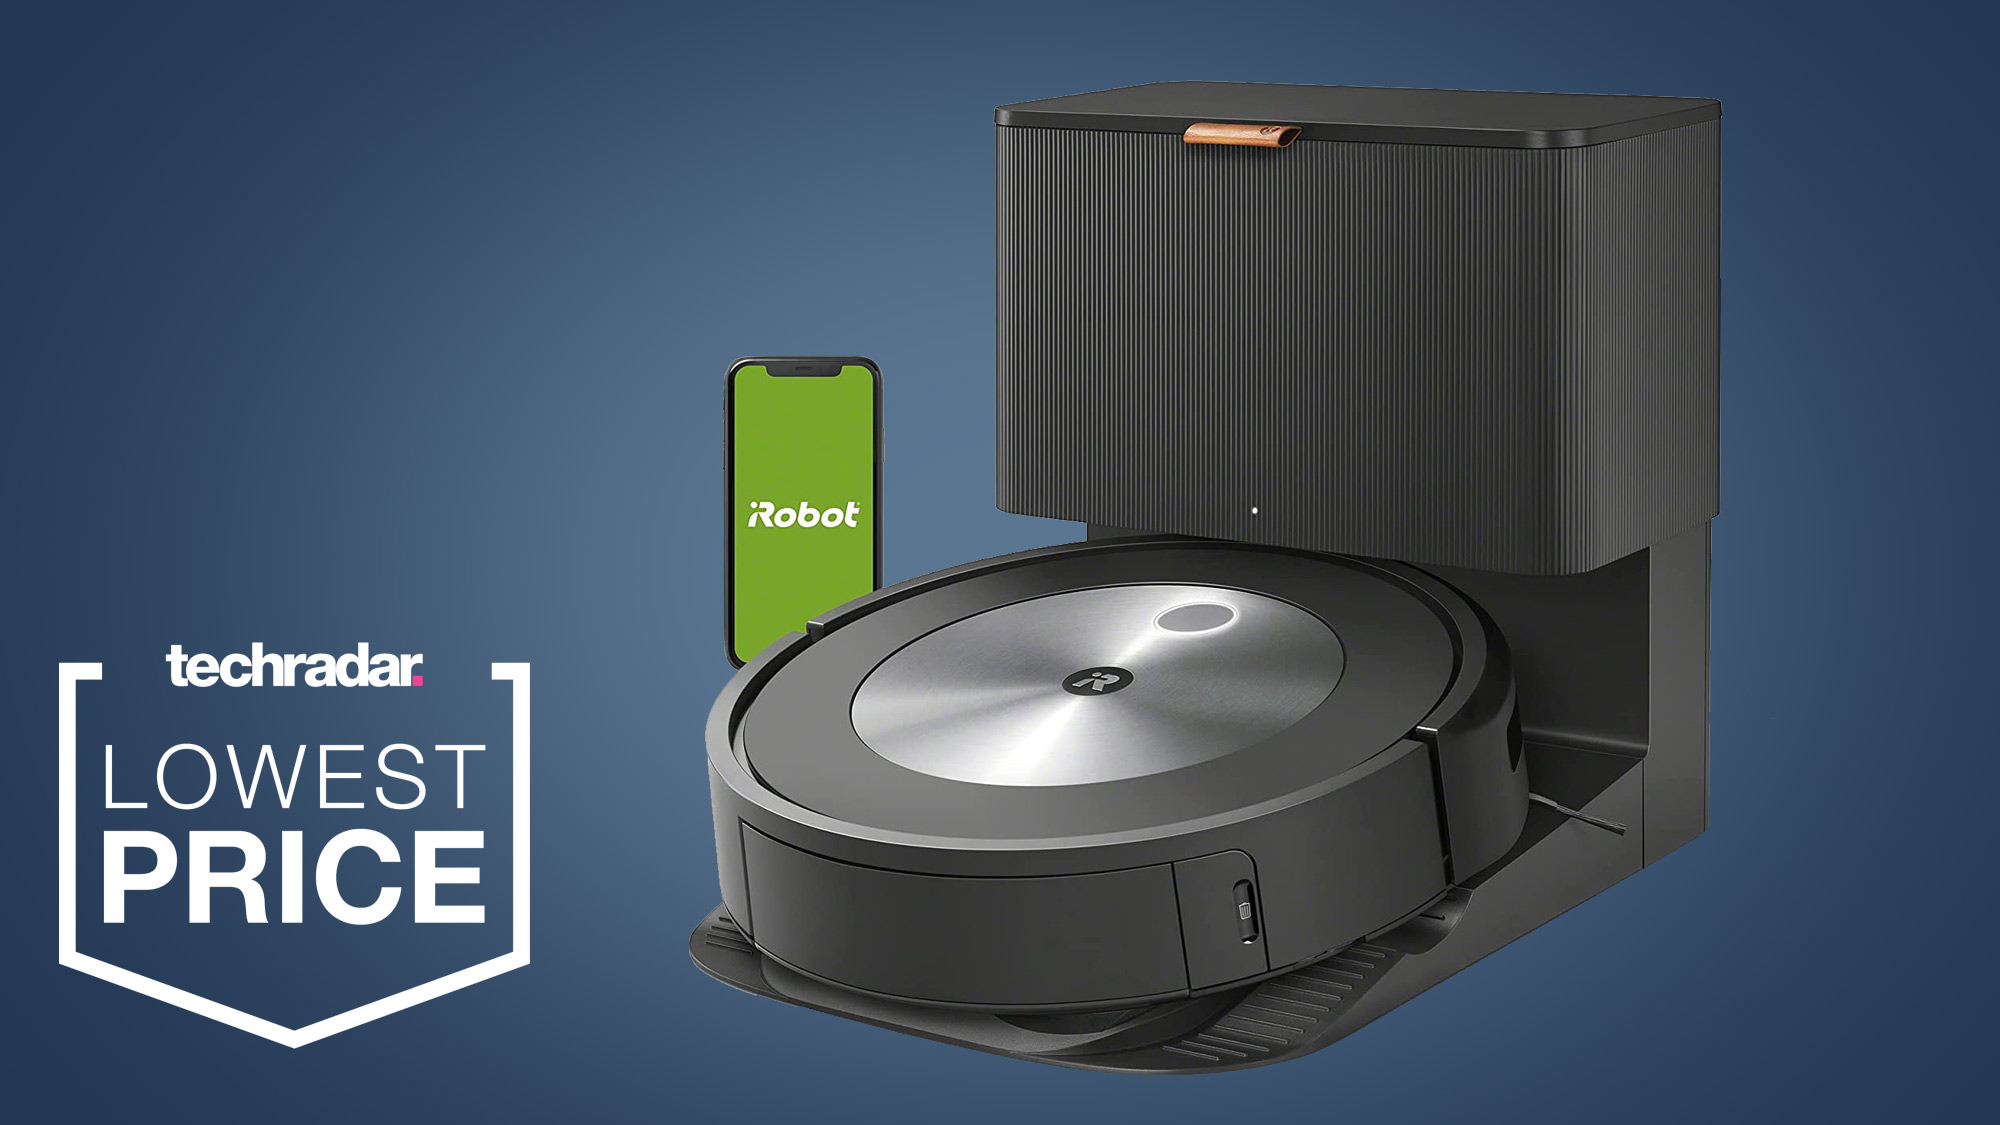 This Roomba robot vacuum is now at its lowest price ever | TechRadar